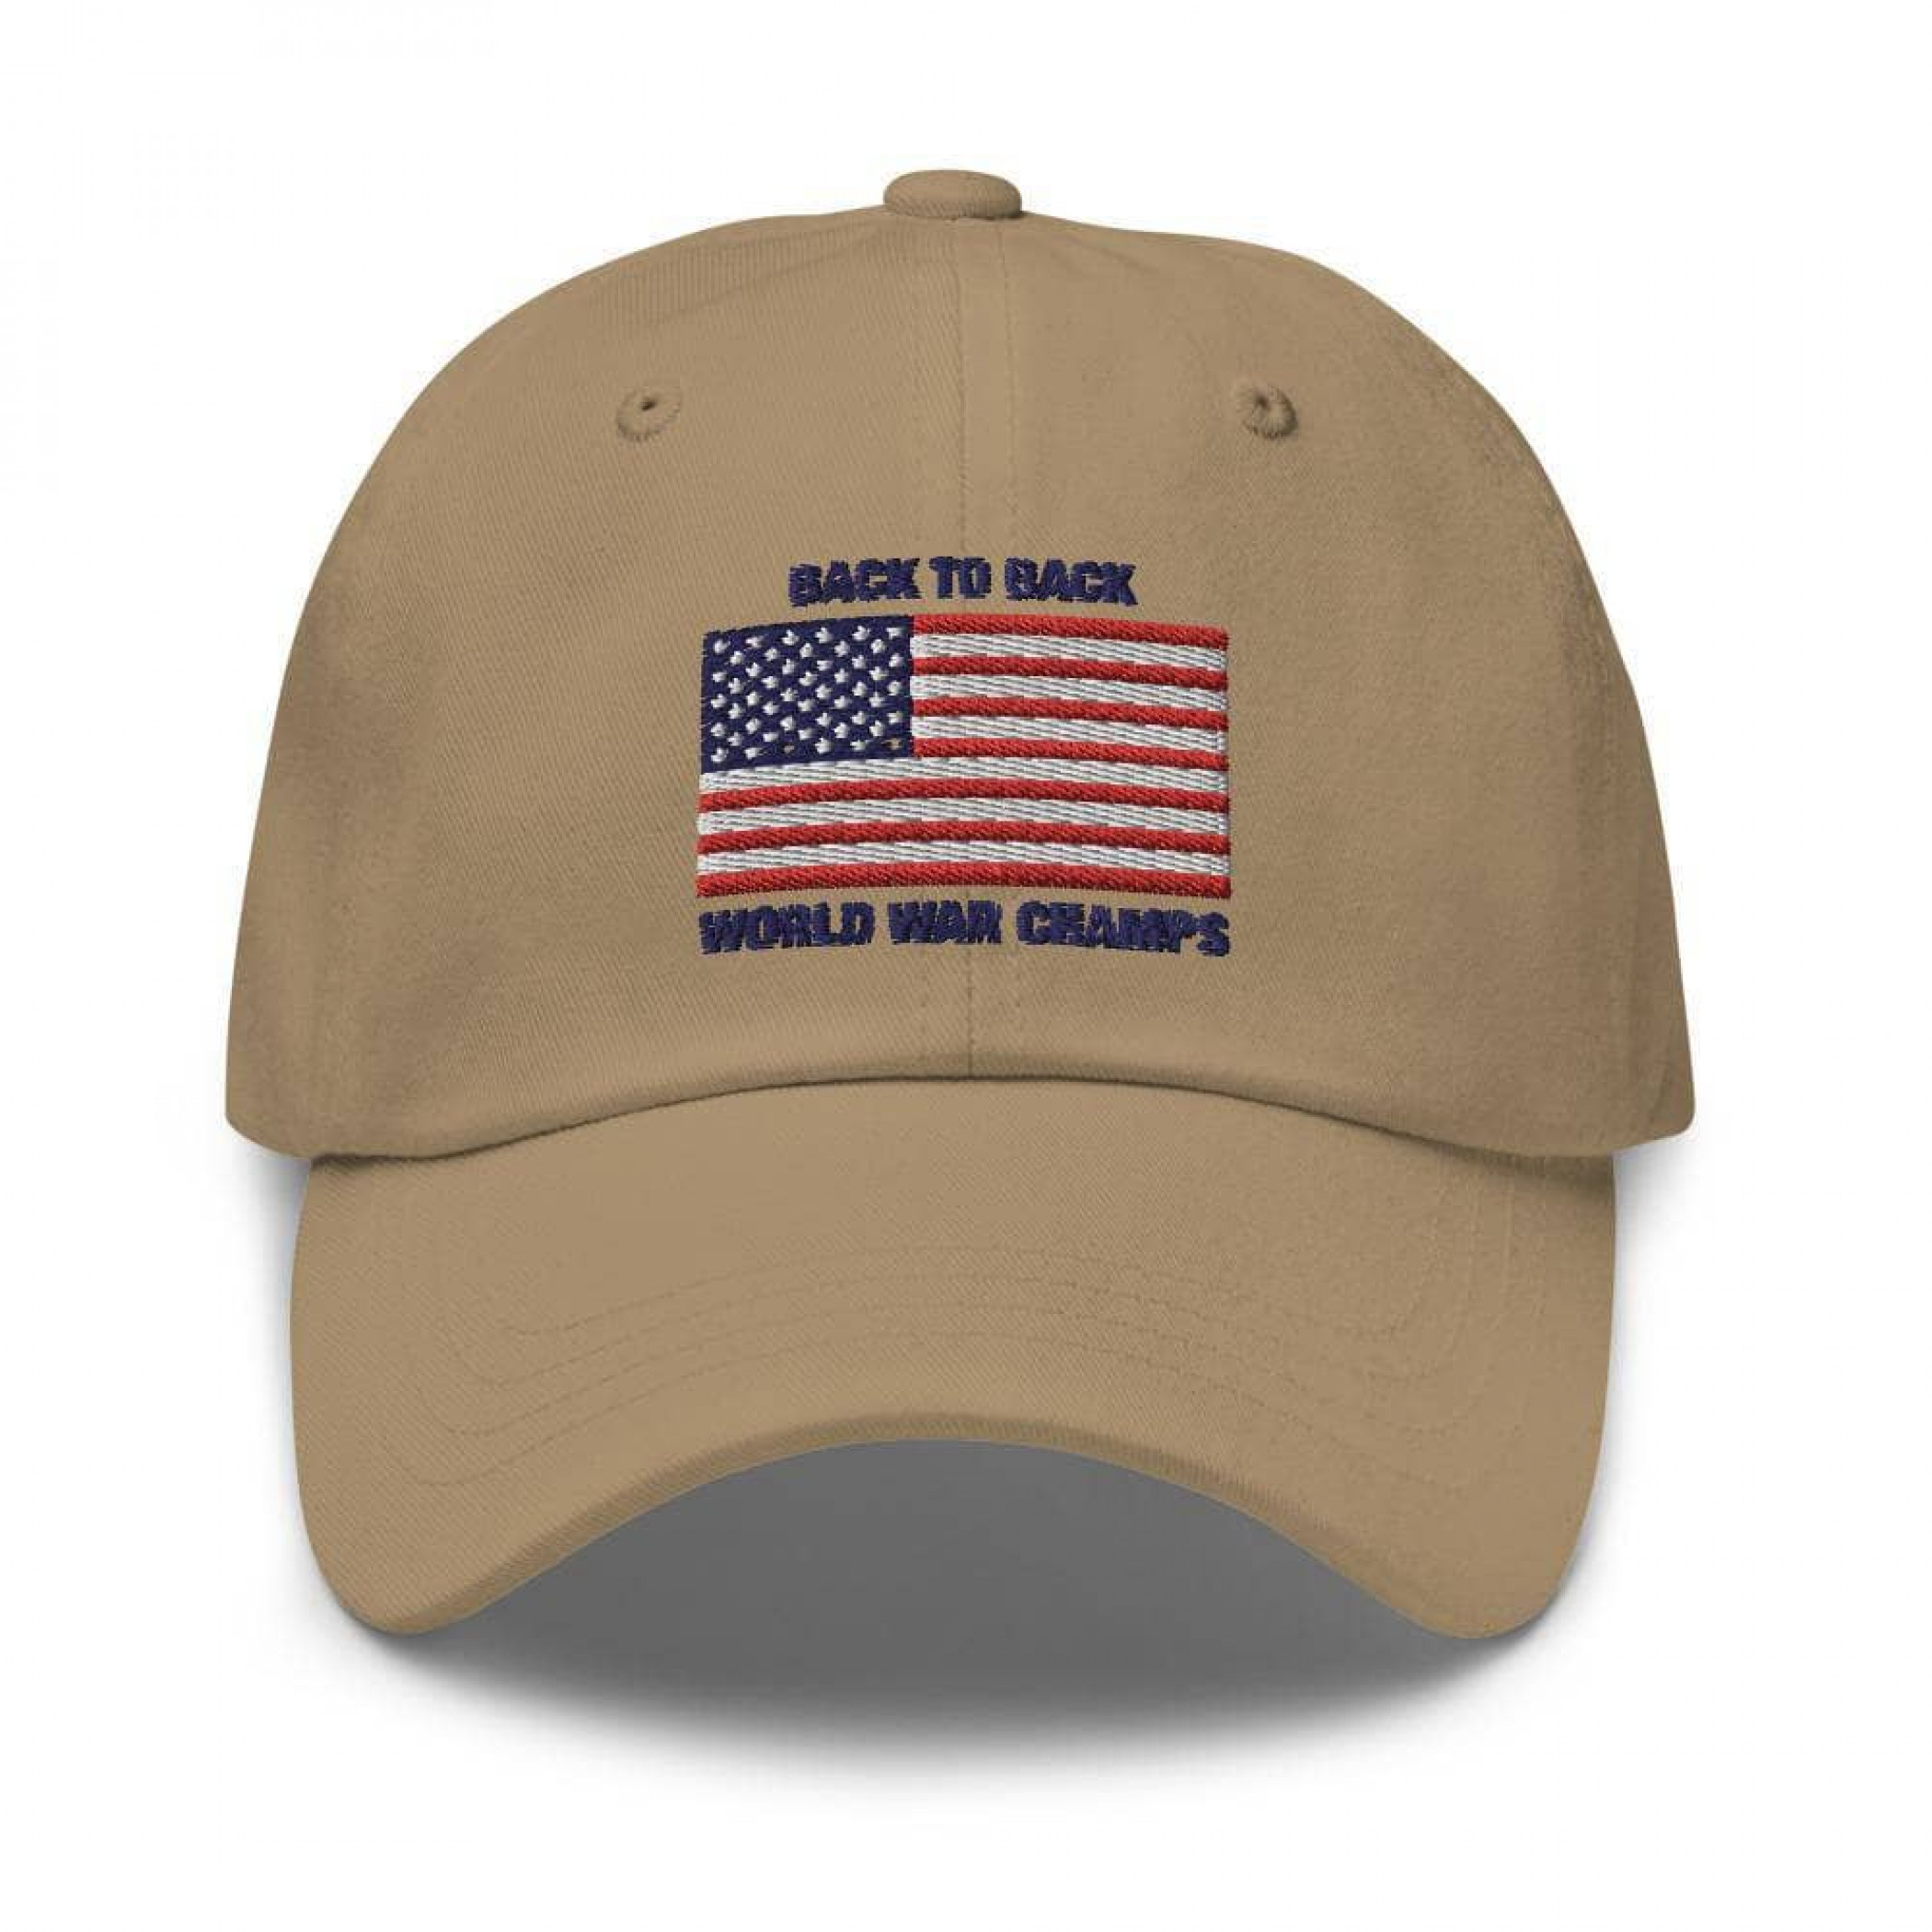 Classic World War Champs Dad hat